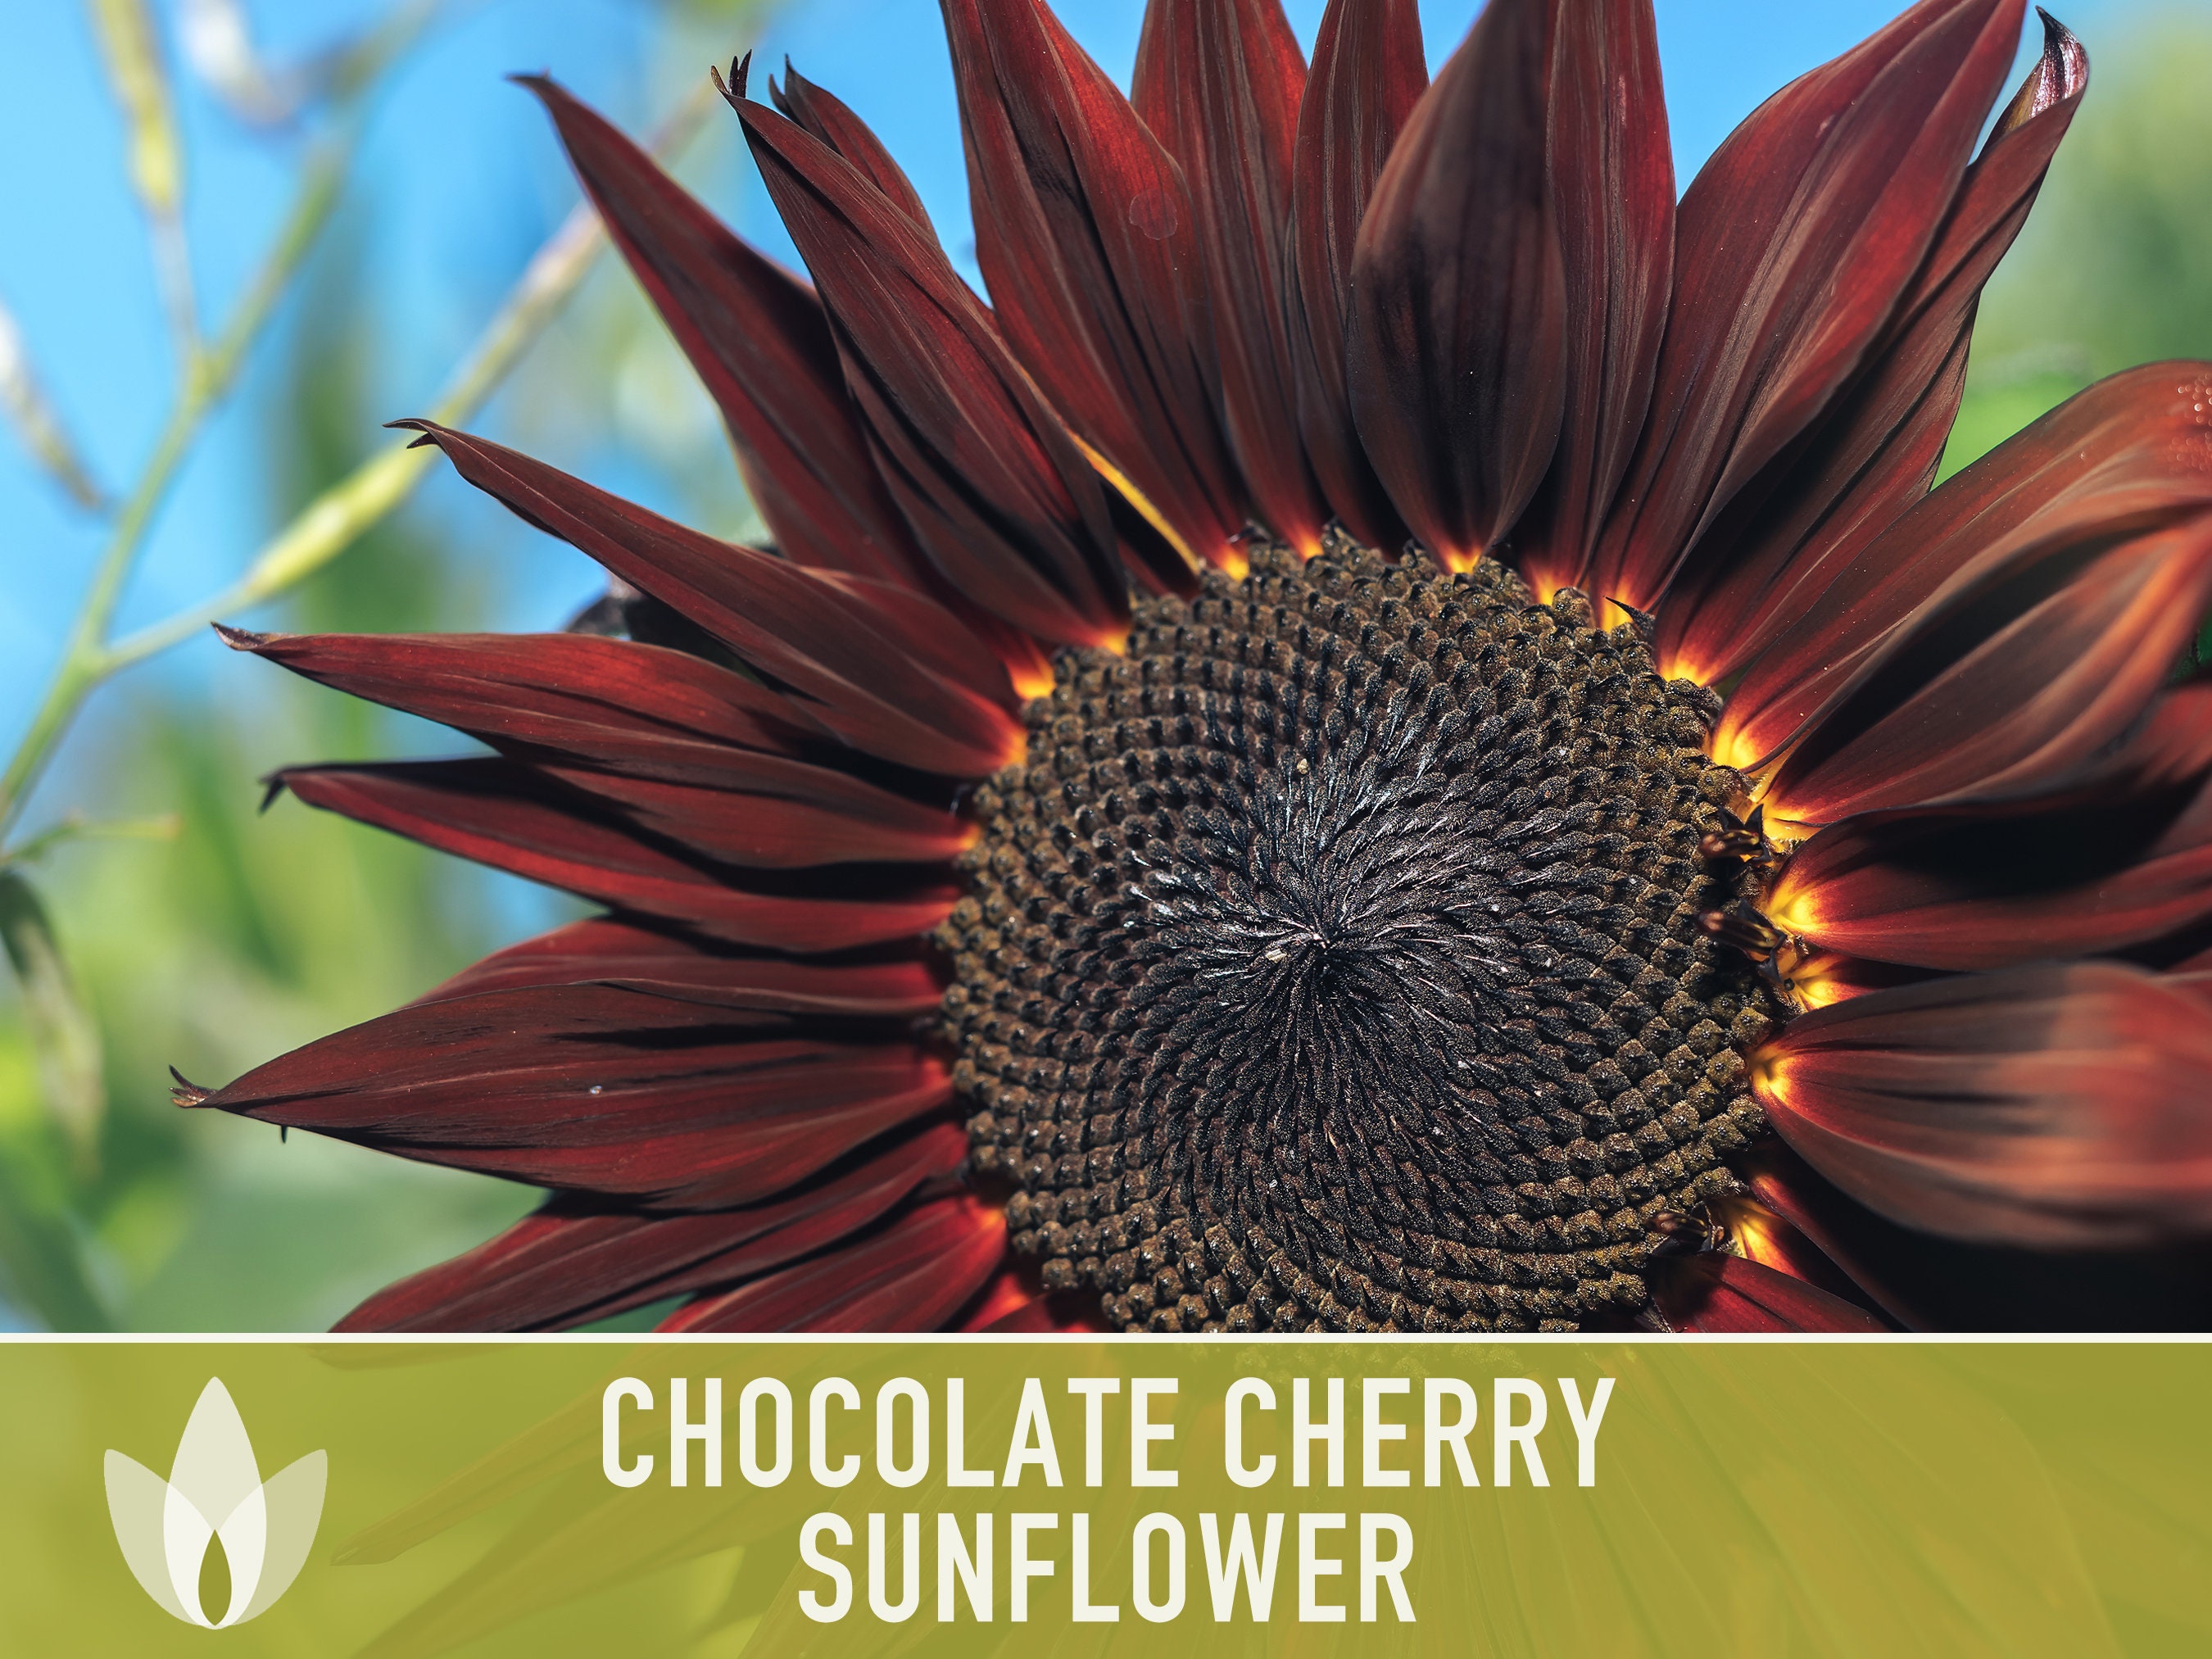 50 Cherry Chocolate Sunflower Seeds to Plant Heirloom & Non-GMO 1 Pack Sunflower Seeds for Planting in Your Home Garden 